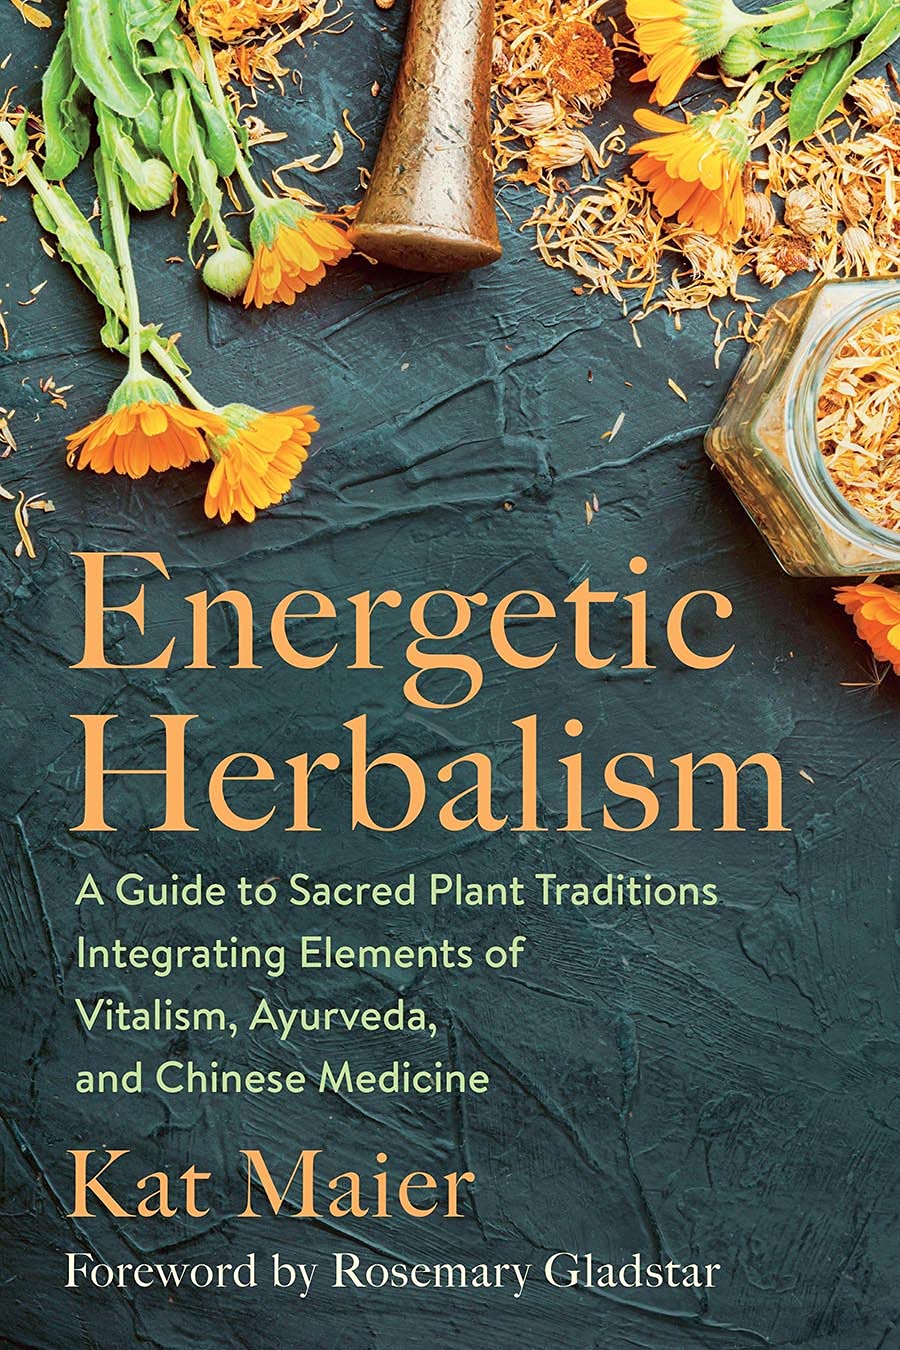 Energetic Herbalism: A Guide to Sacred Plant Traditions Integrating Elements of Vitalism, Ayurveda, and Chinese Medicine (Kat Meier)